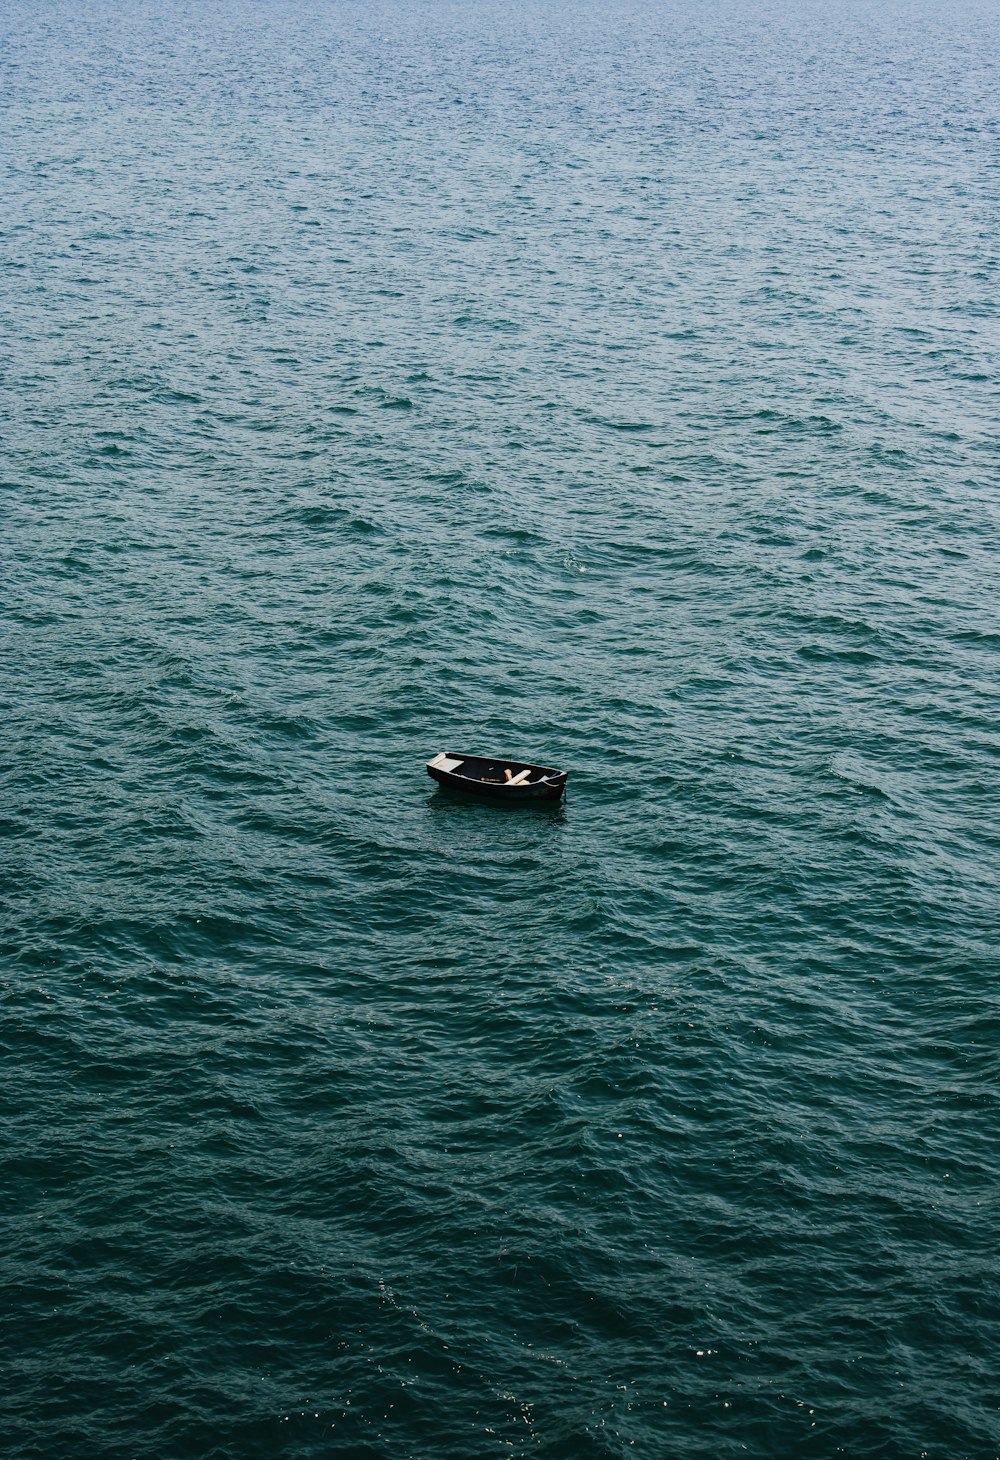 black boat on body of water during daytime